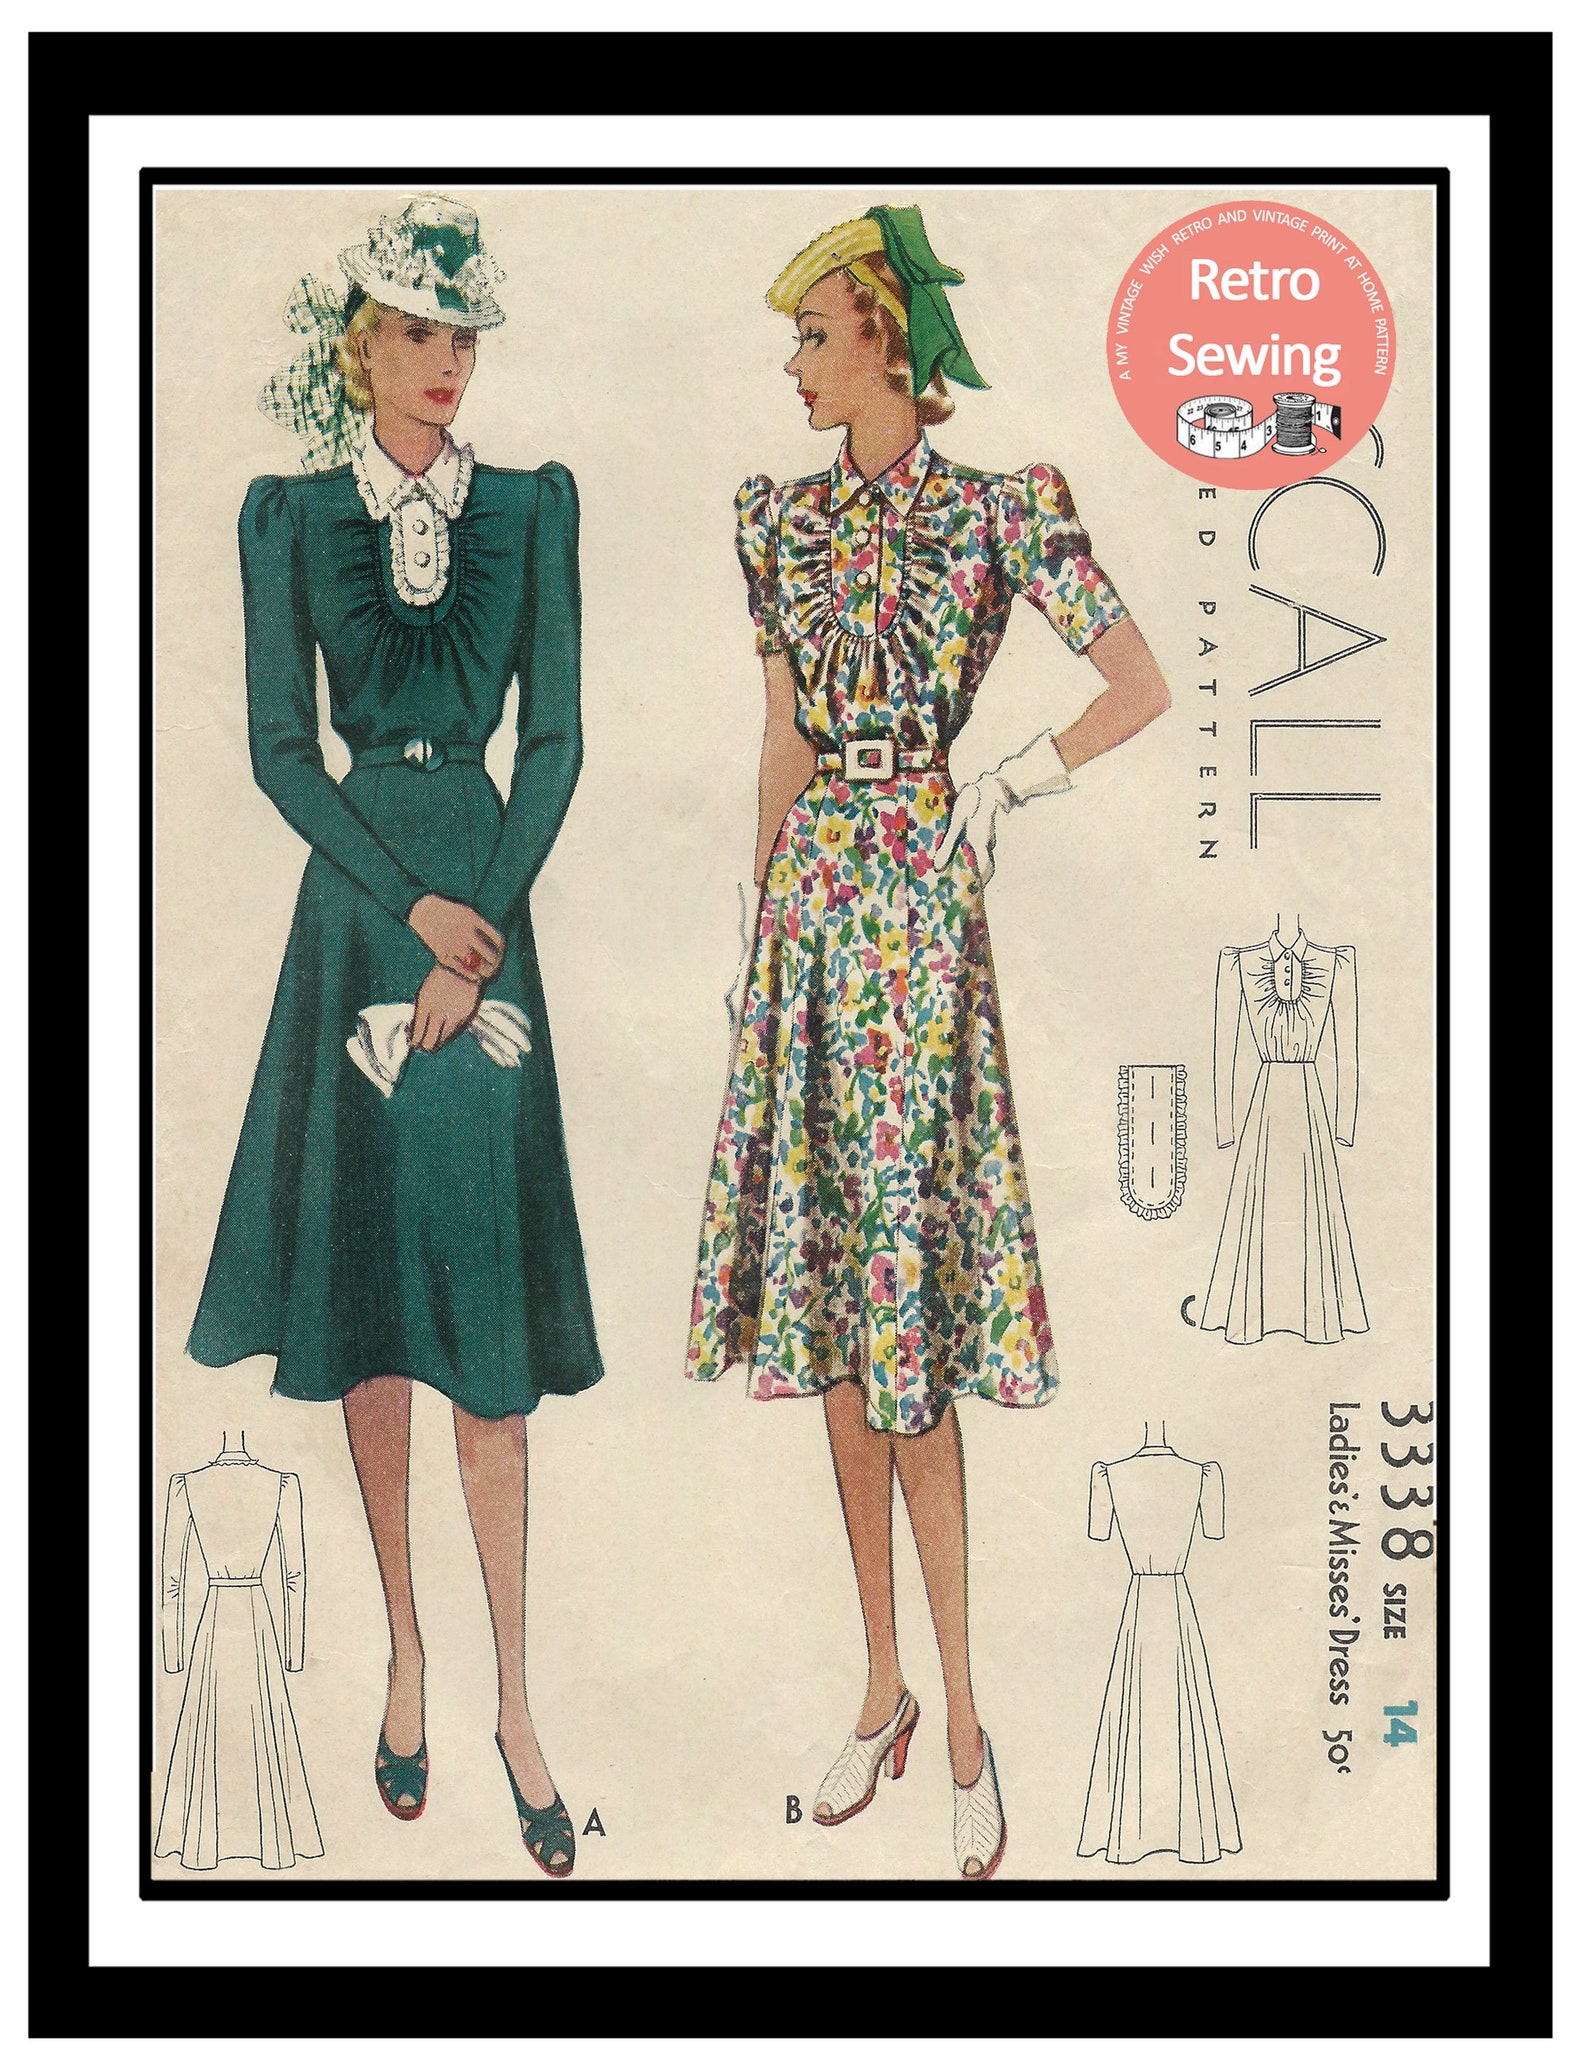 1930s Afternoon Tea Dress Sewing Pattern Bust 32 - Etsy UK